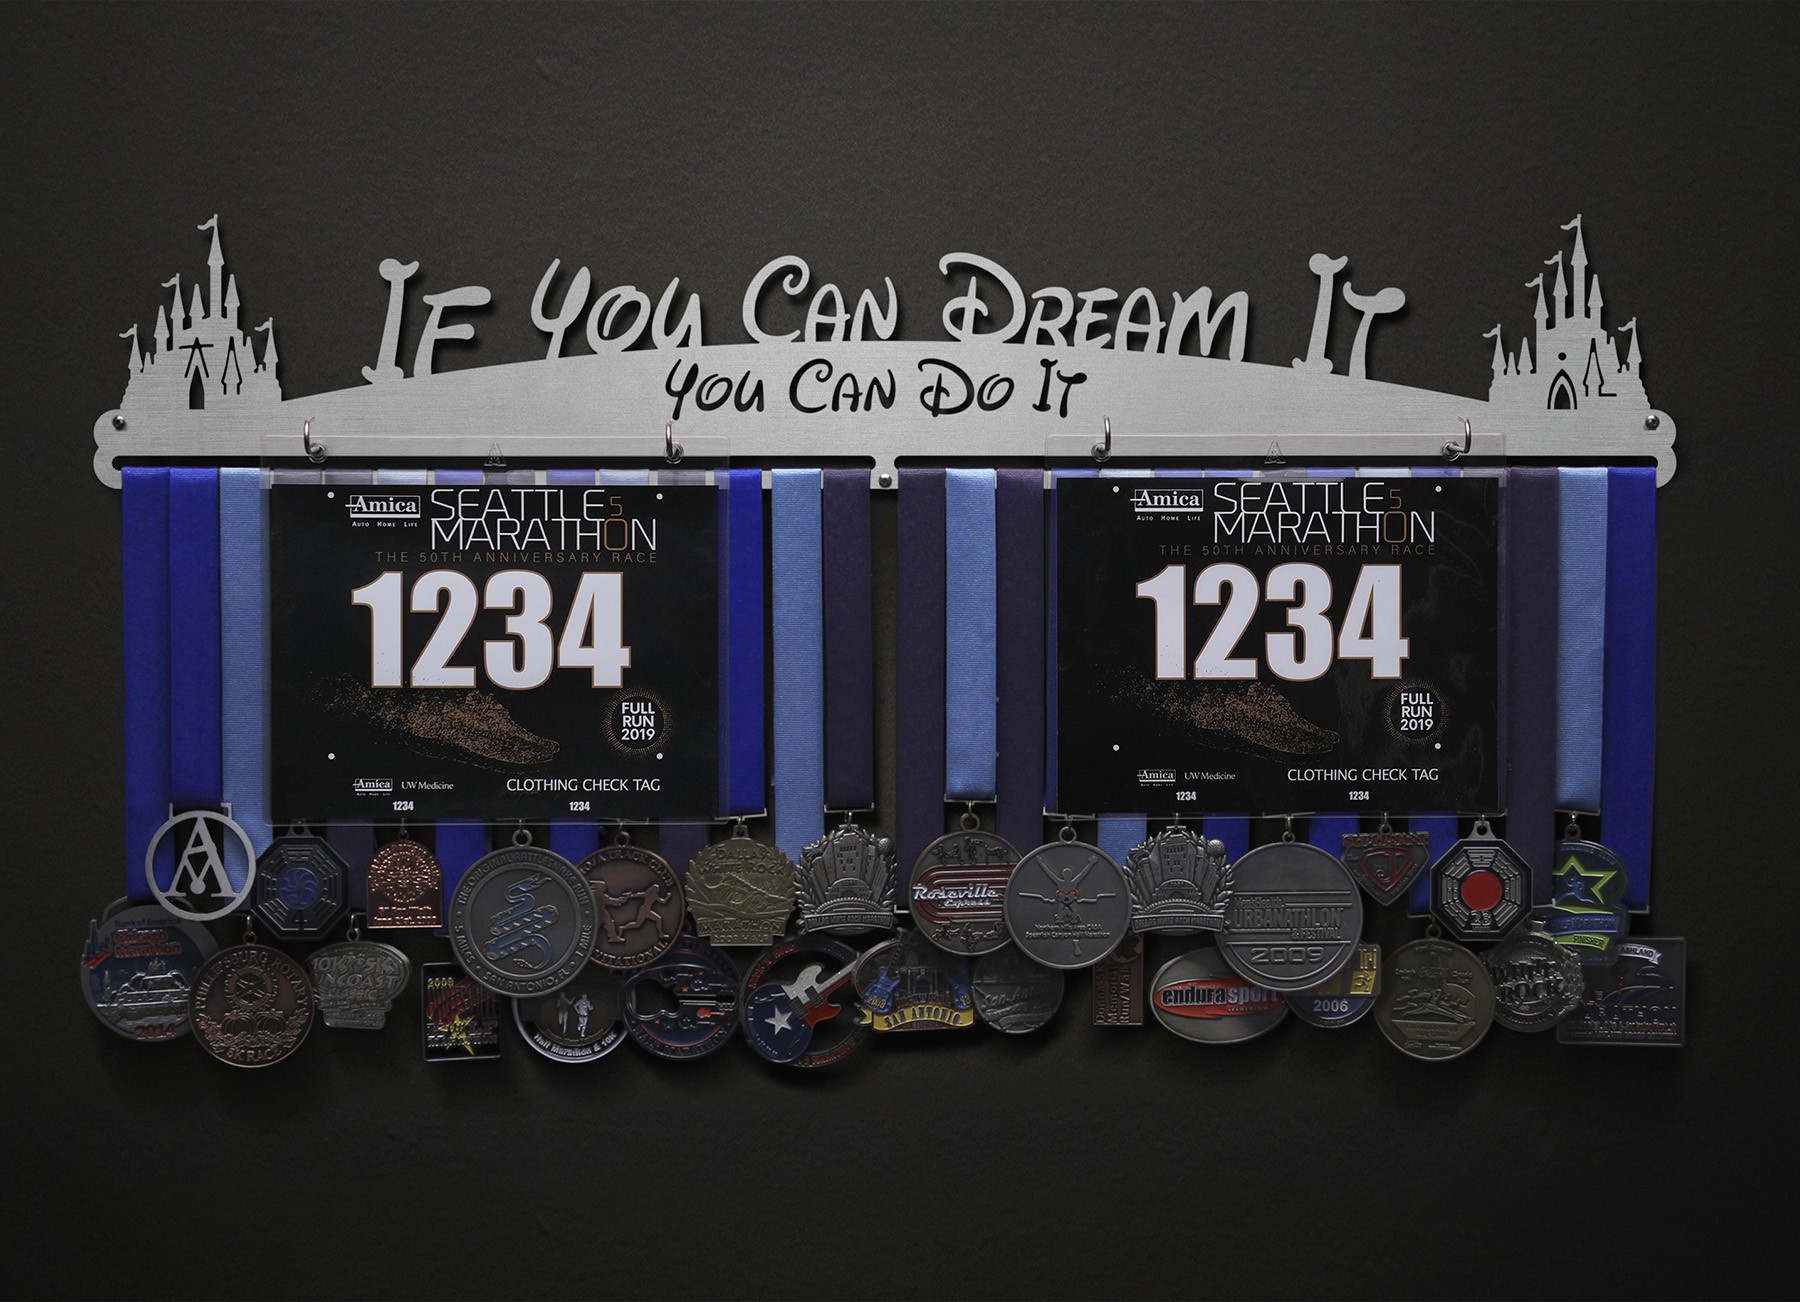 If You Can Dream It You Can Do It Bib and Medal Display